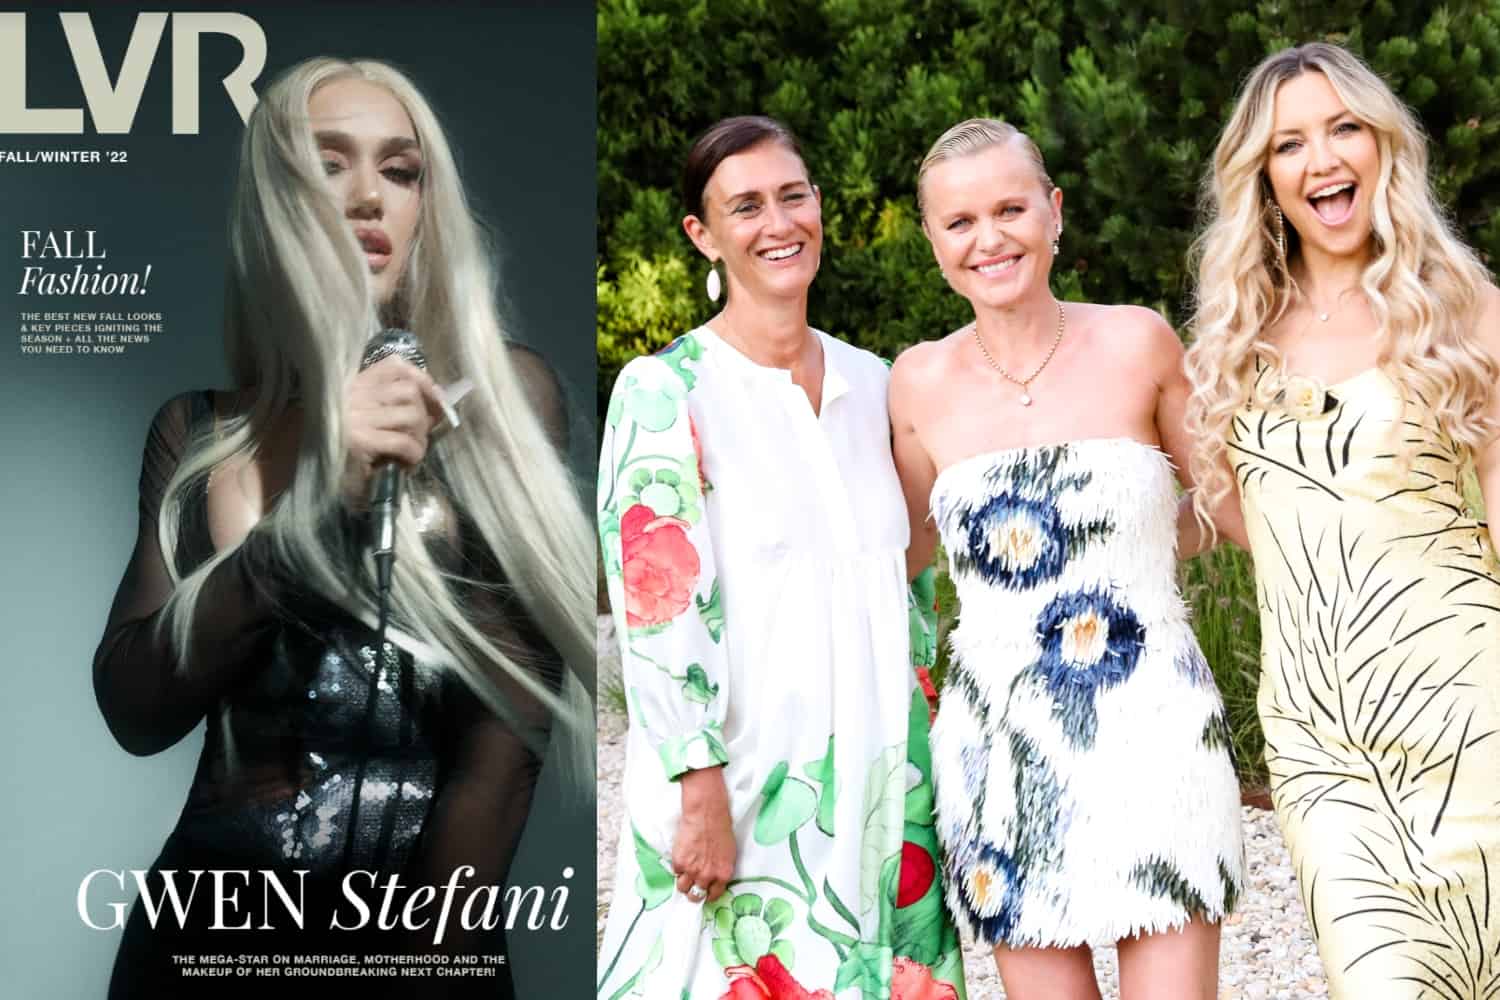 Daily News: Gwen Stefani Gets Real For LVR Magazine, Dr. Barbara Sturm, Sally Singer & Kate Hudson Celebrate Amazon Luxury Stores Launch Out East